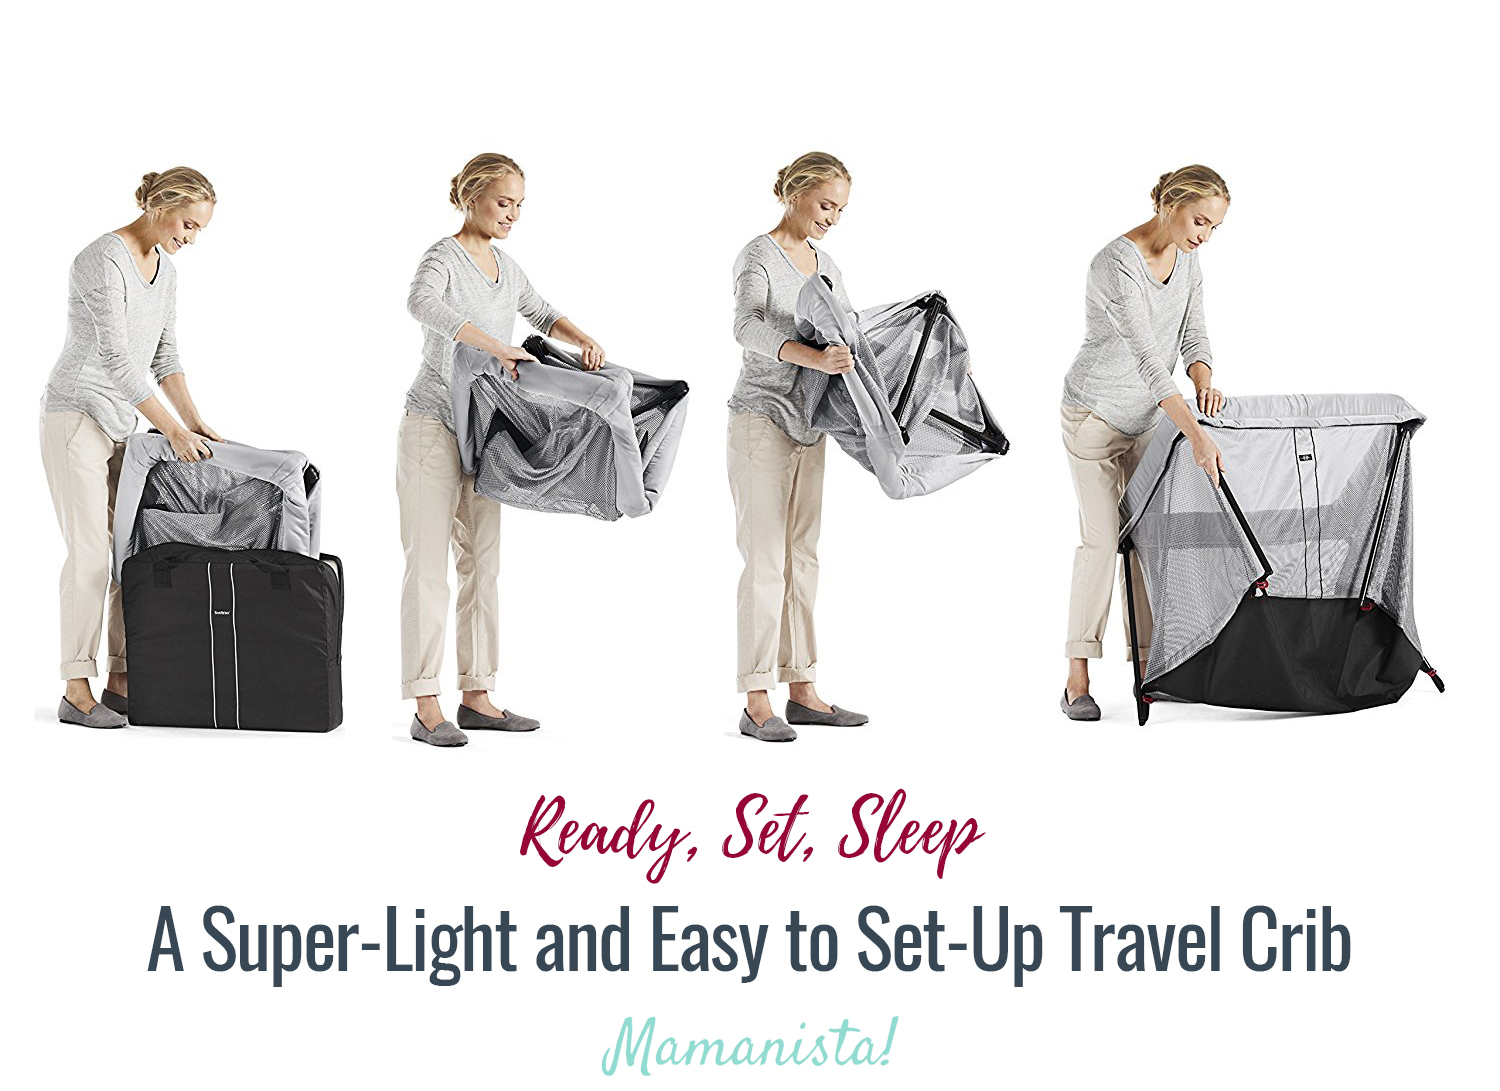 Ready, Set, Sleep - A Super-Light and Easy to Set-Up Travel Crib